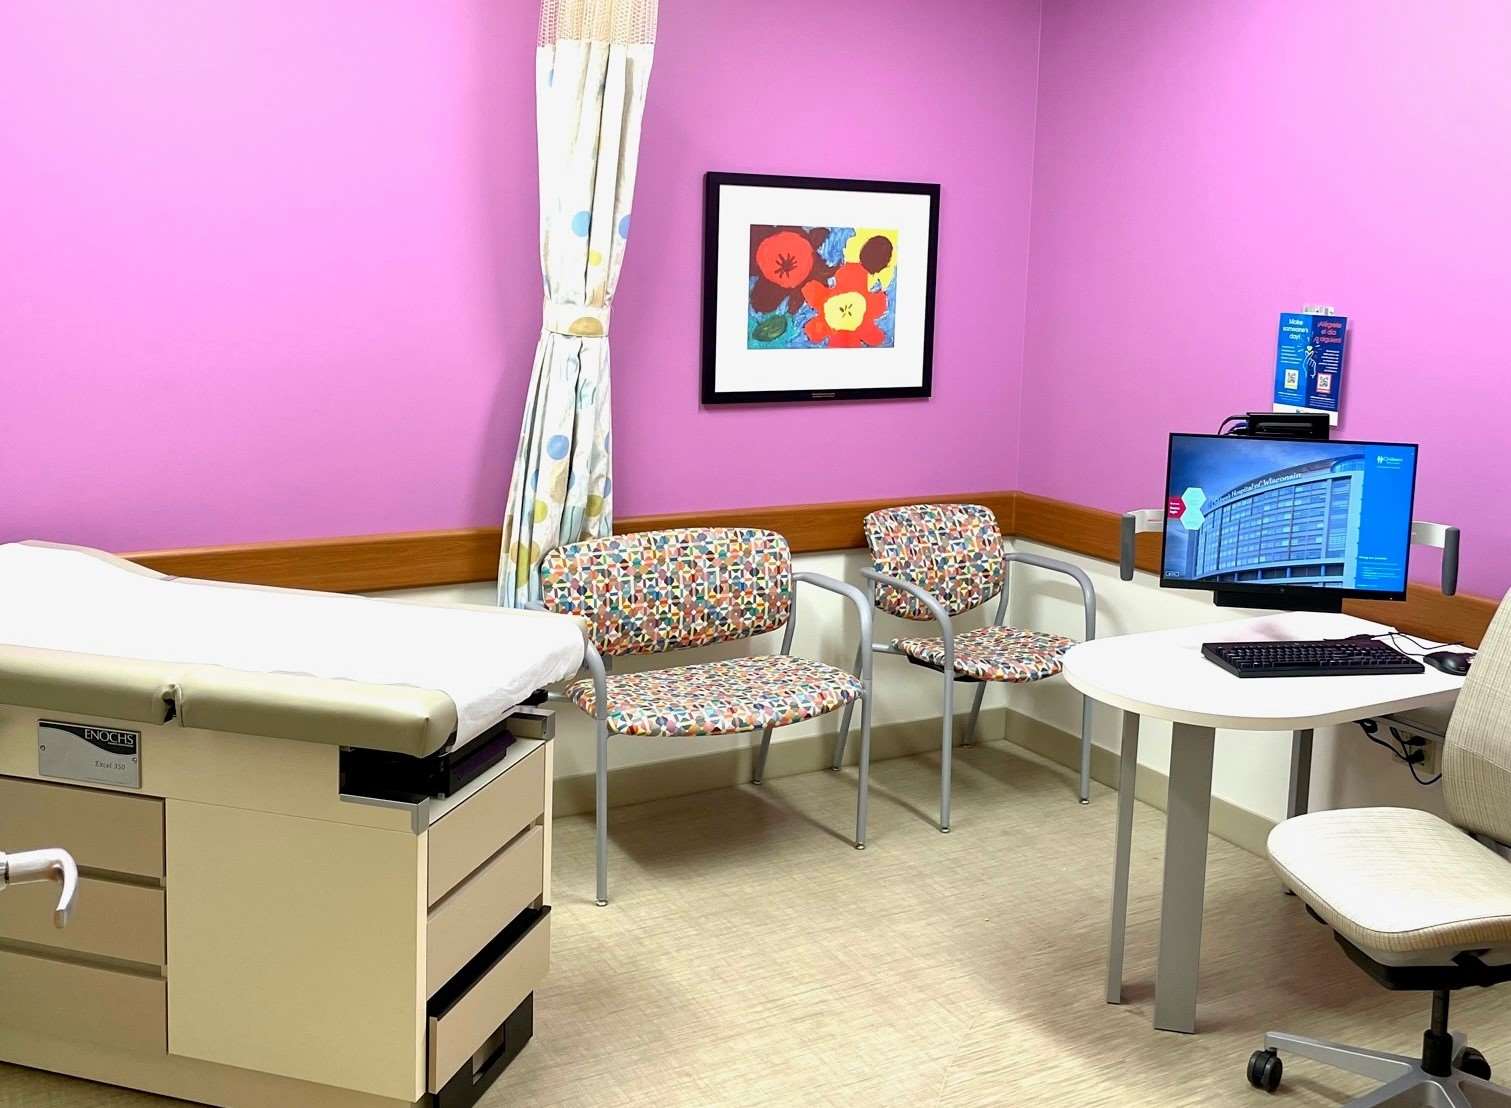 5 Outpatient clinic rooms